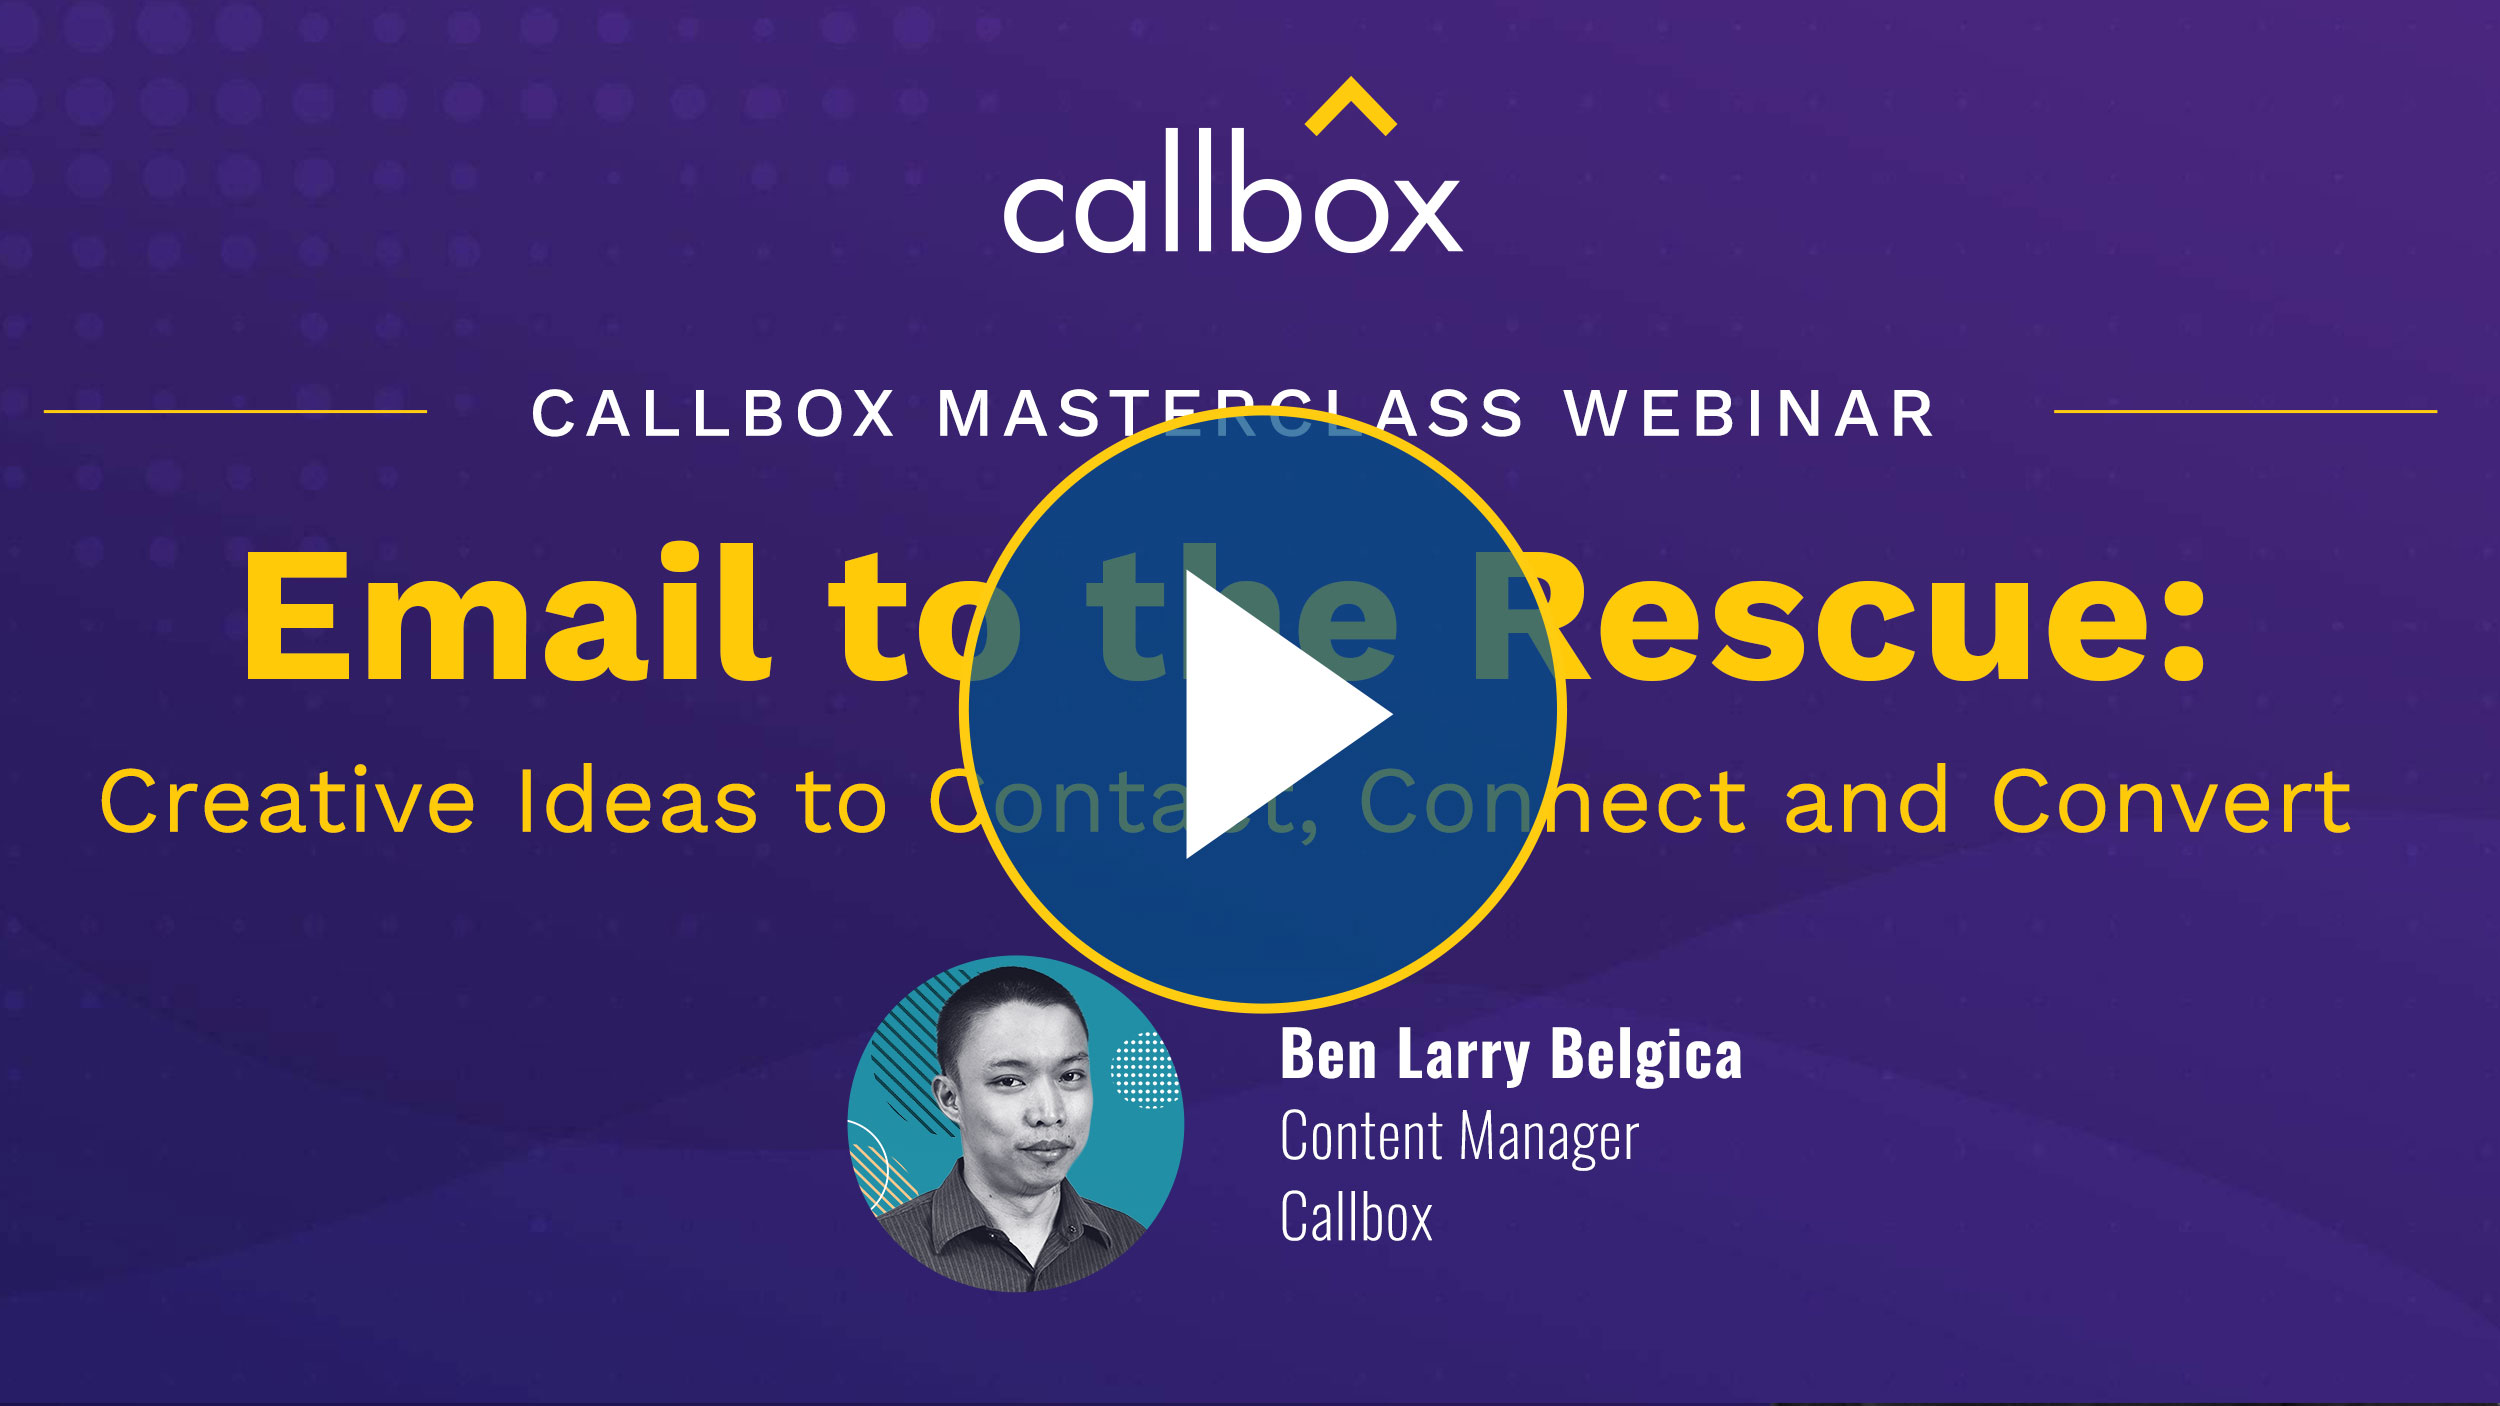 Email to the Rescue: Creative Ideas to Contact, Connect and Convert